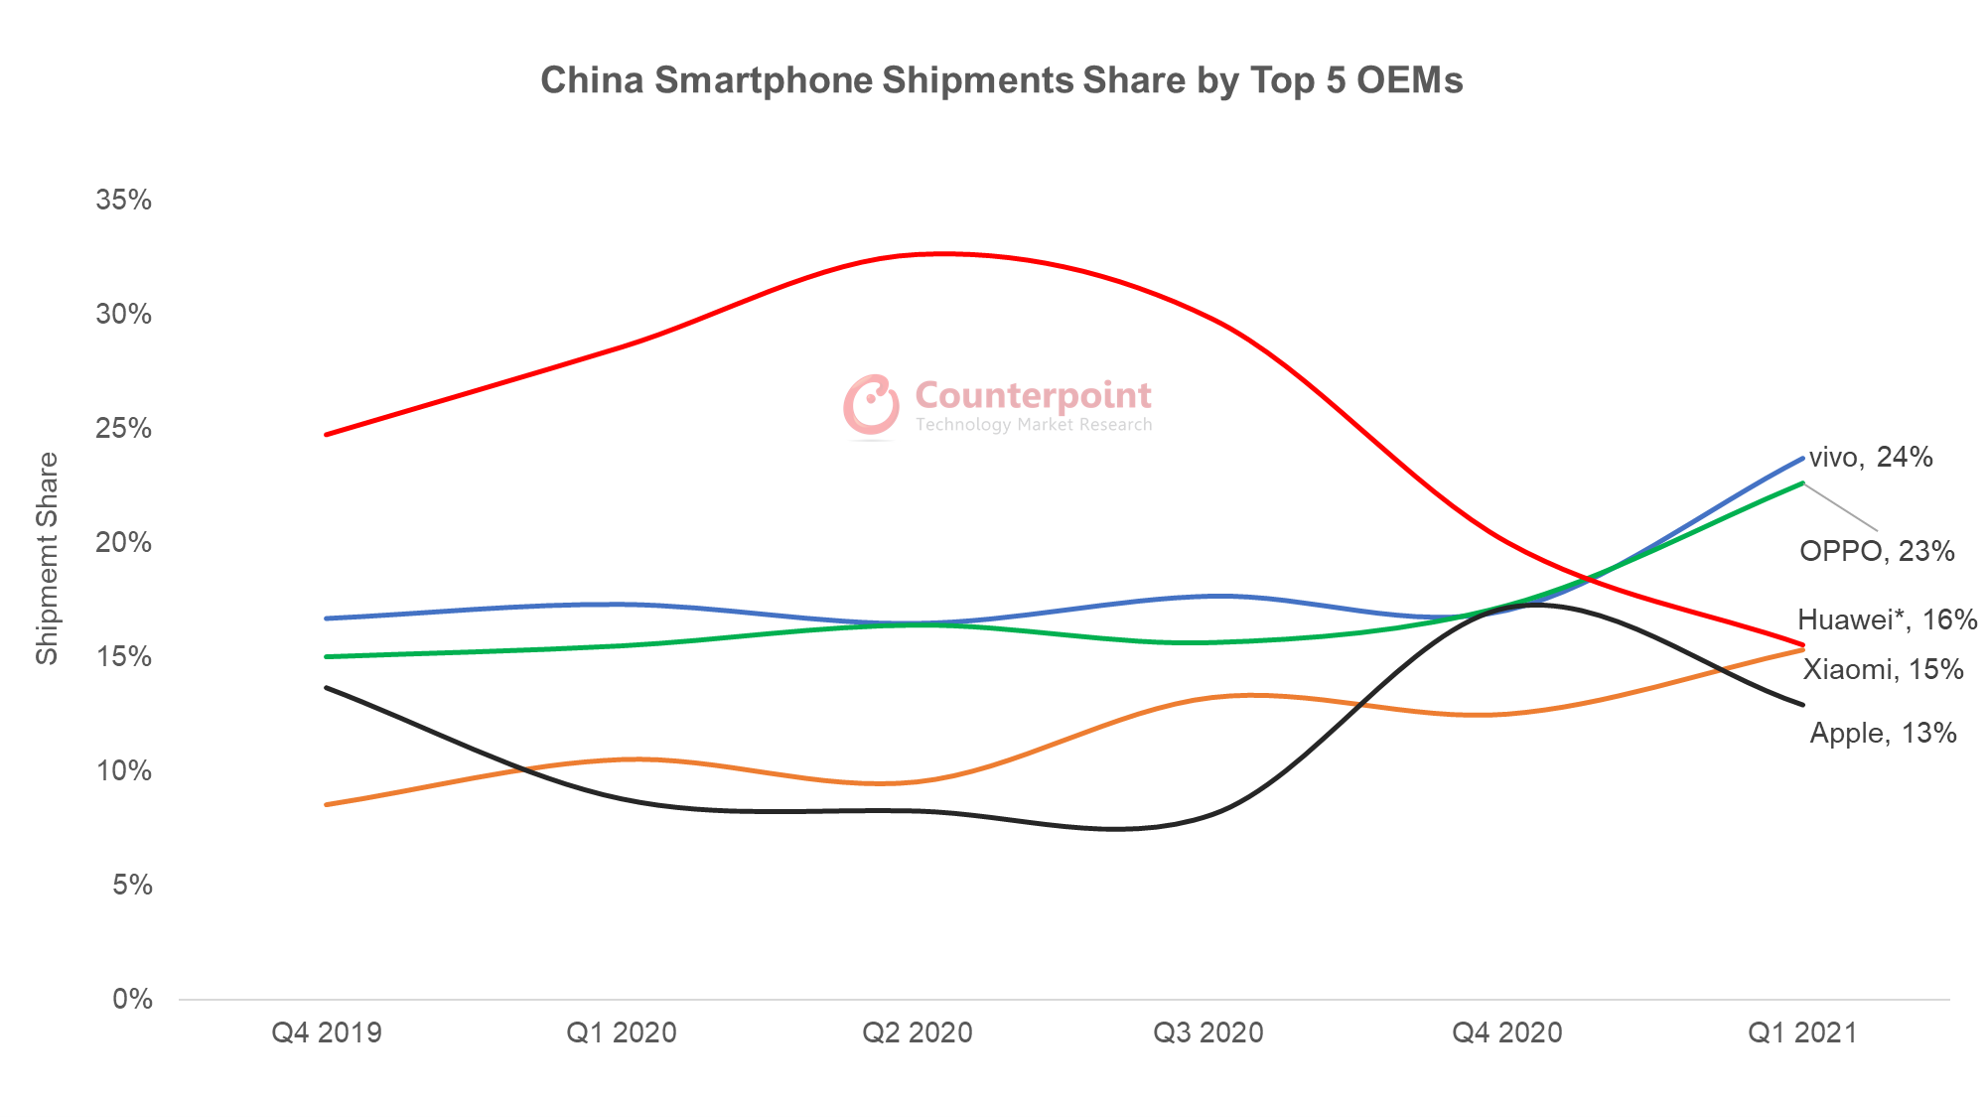 Huawei's market share in China has halved in under a year